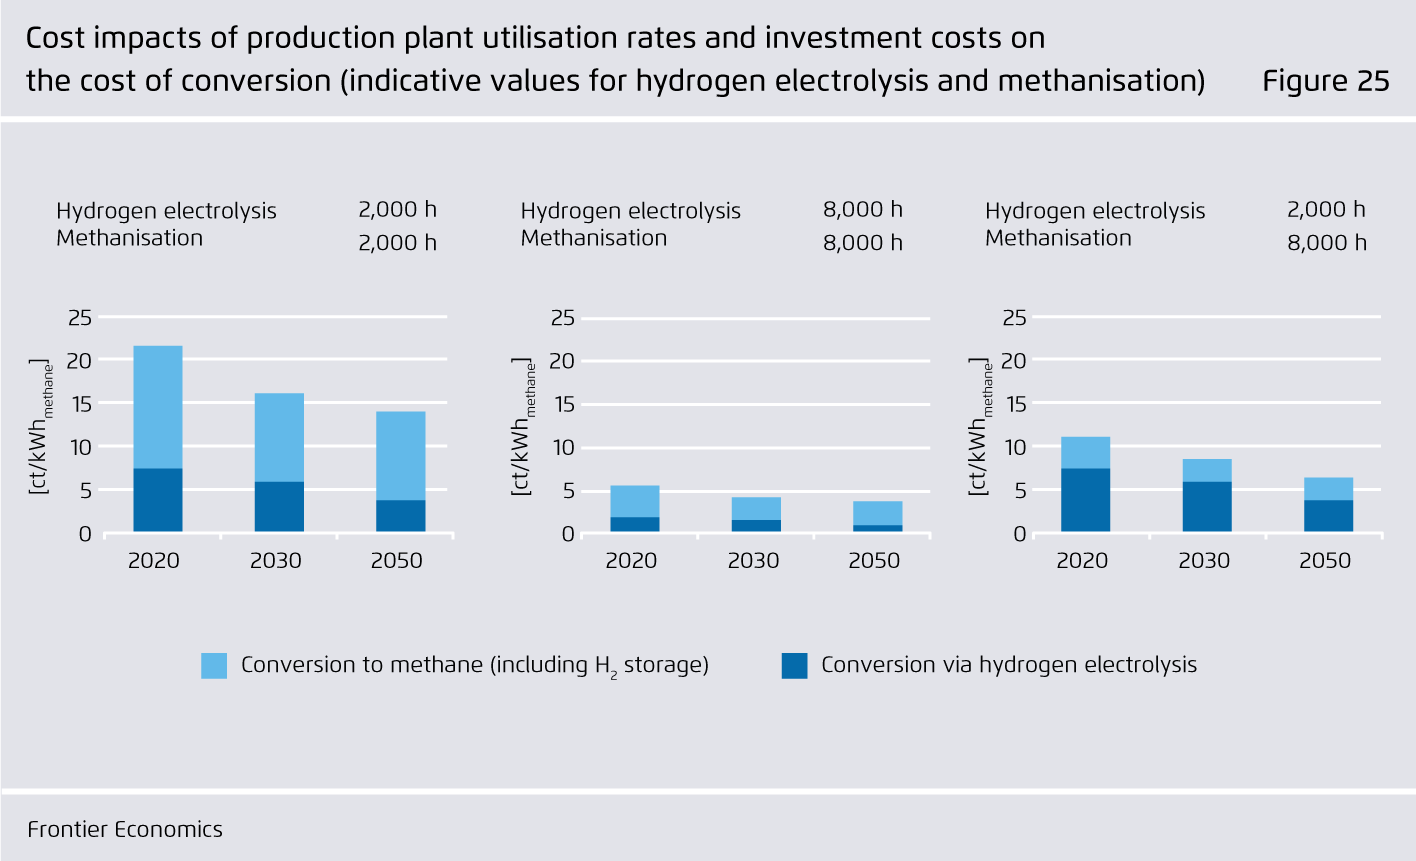 Preview for Cost impacts of production plant utilisation rates and investment costs on the cost of conversion (indicative values for hydrogen electrolysis and methanisation)